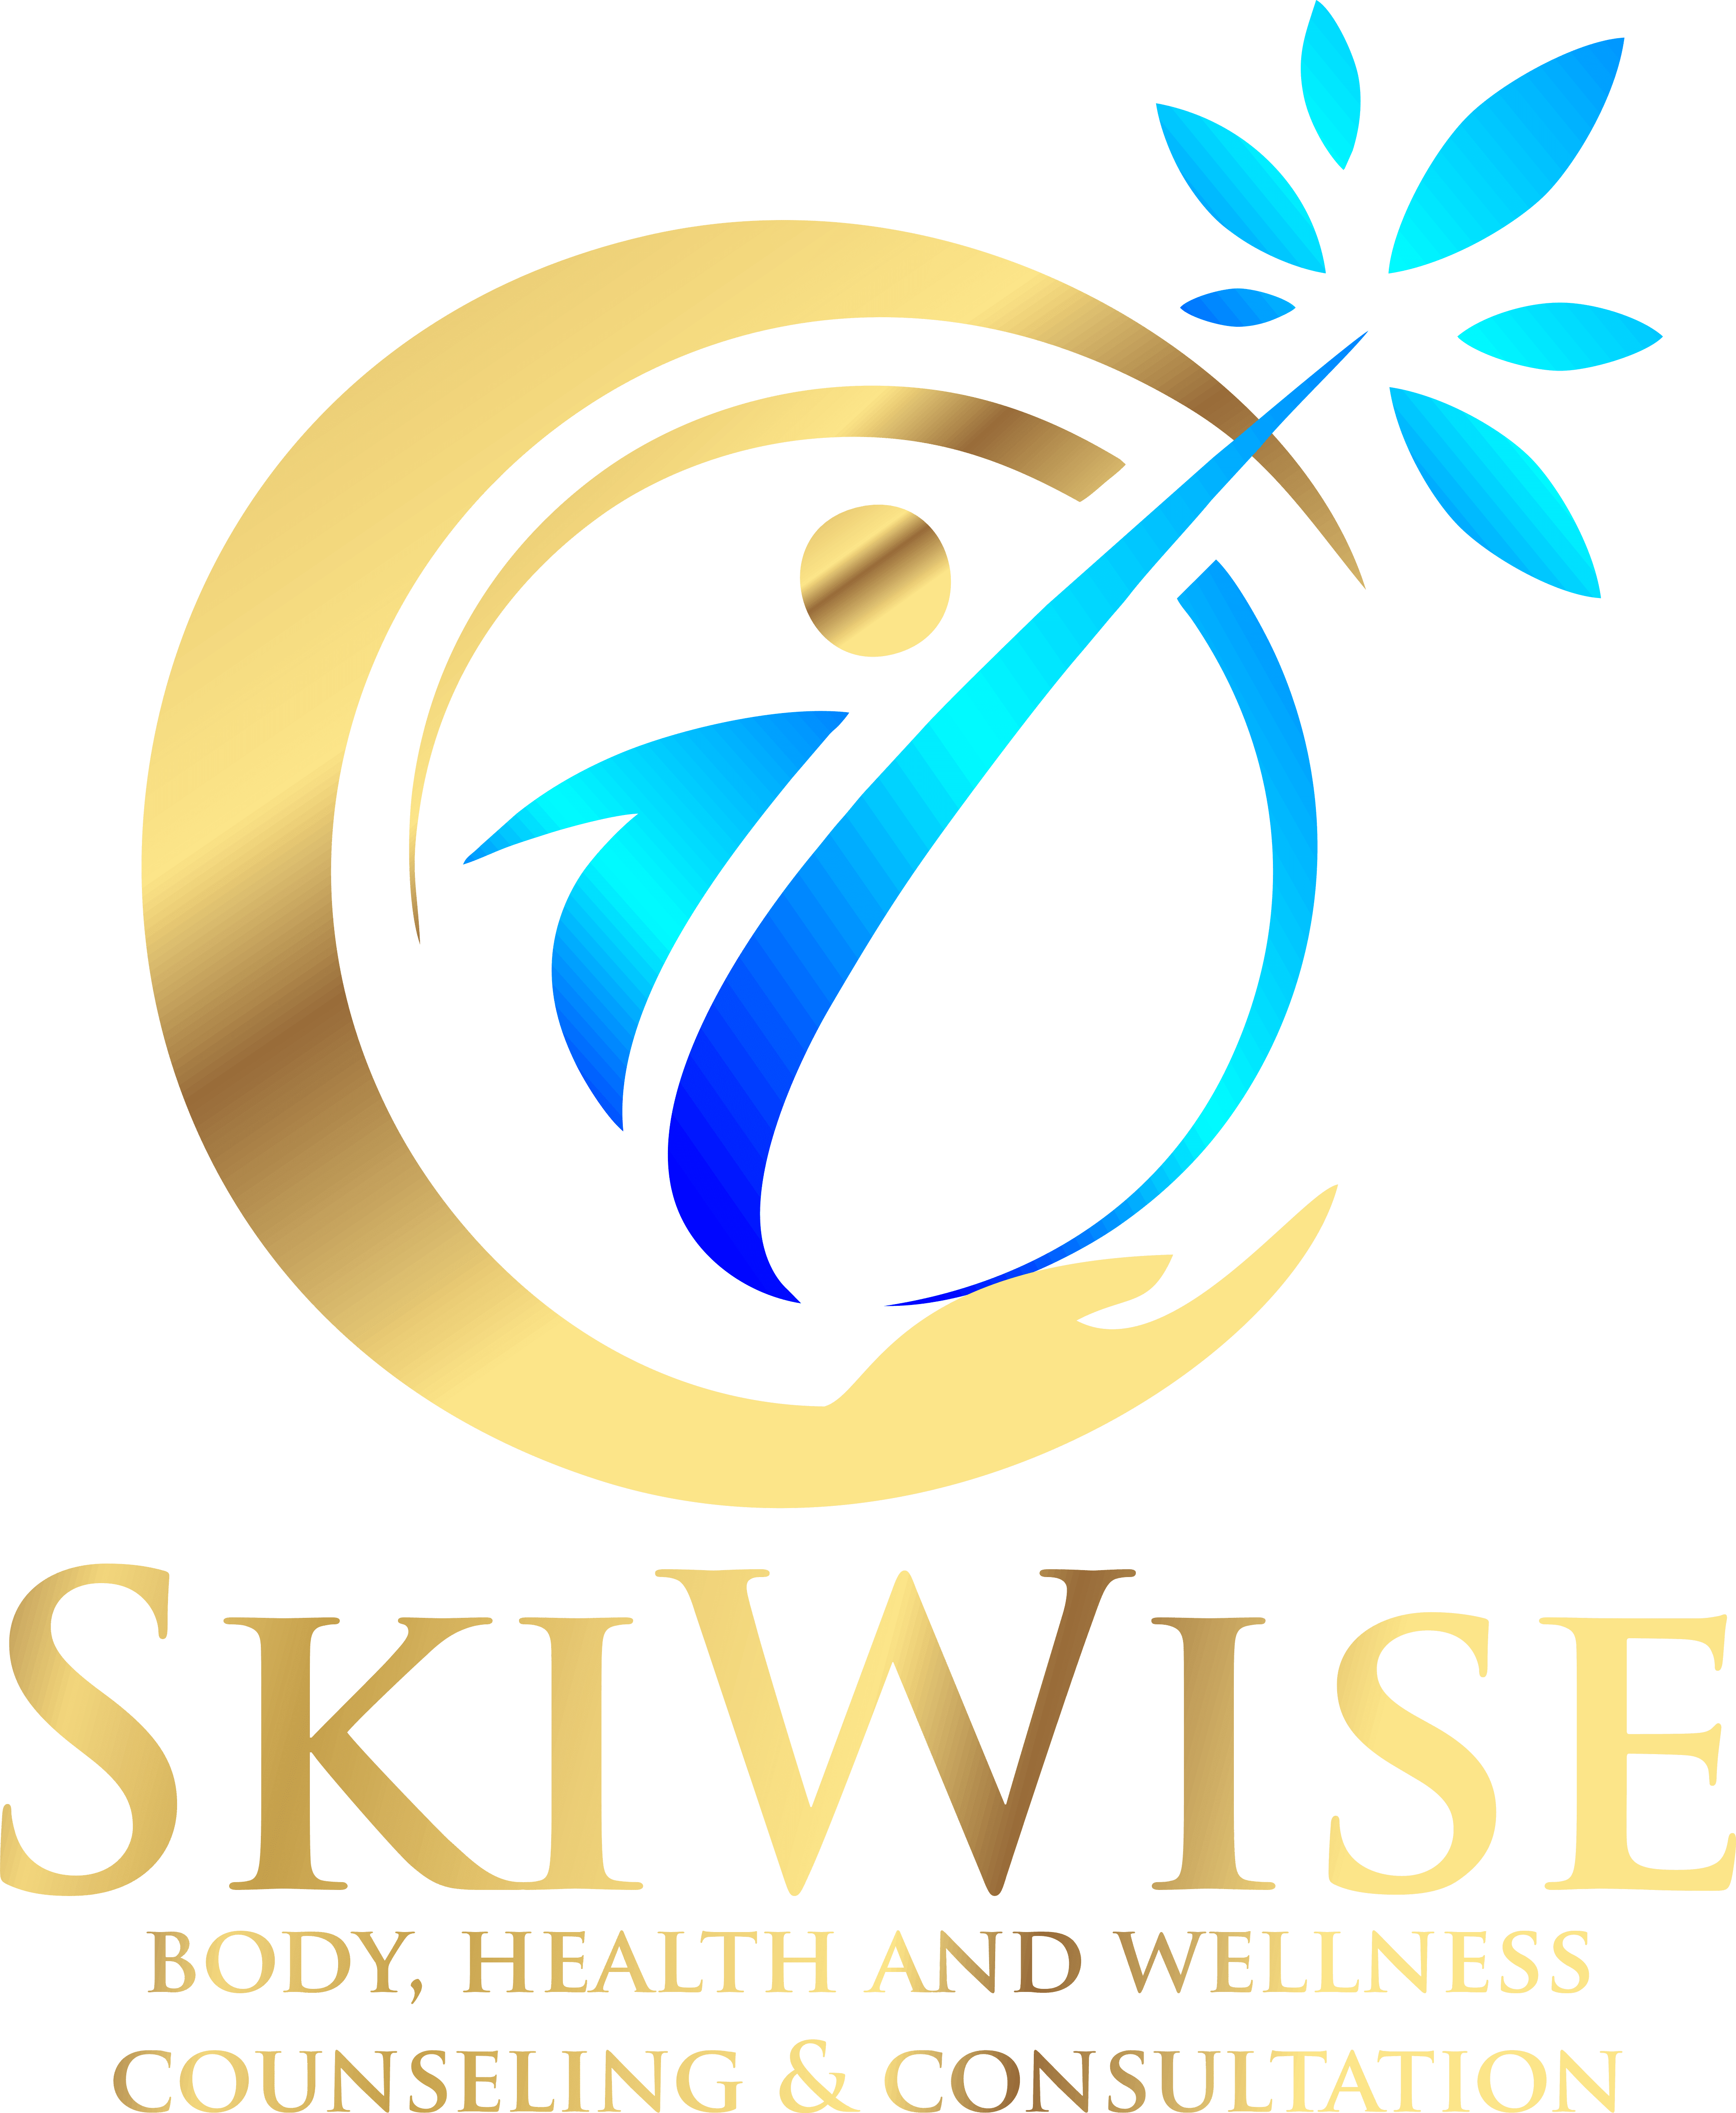 SkiWise Health and Wellness Services